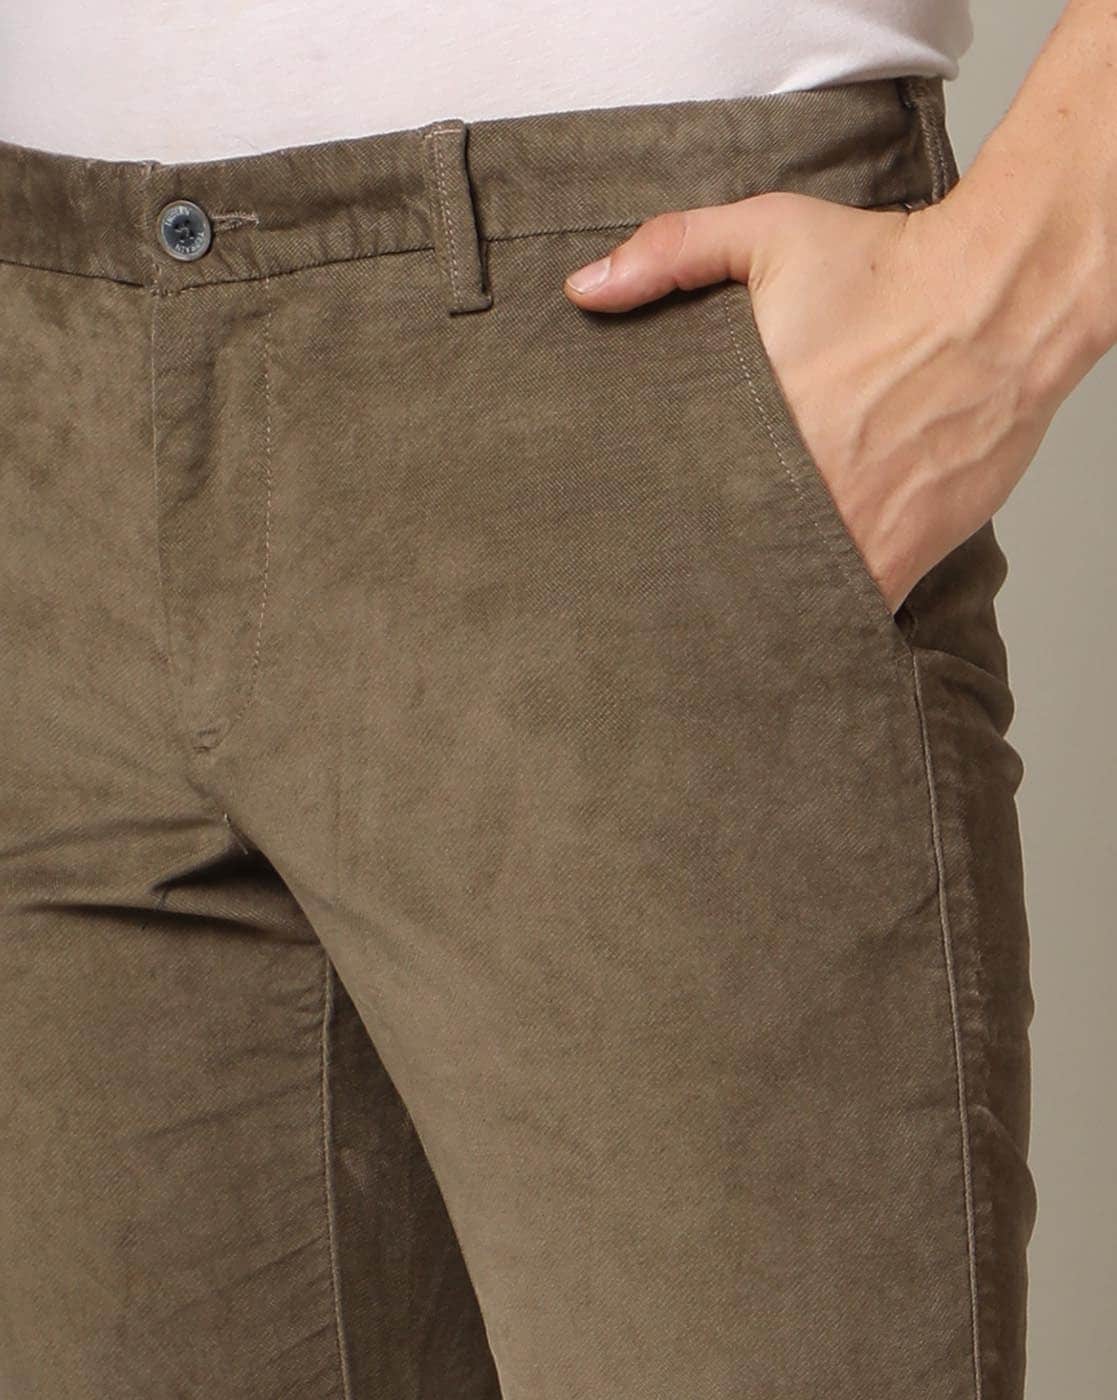 Buy Classic Polo Mens Cotton Textured Slim Fit Grey Color Trouser online